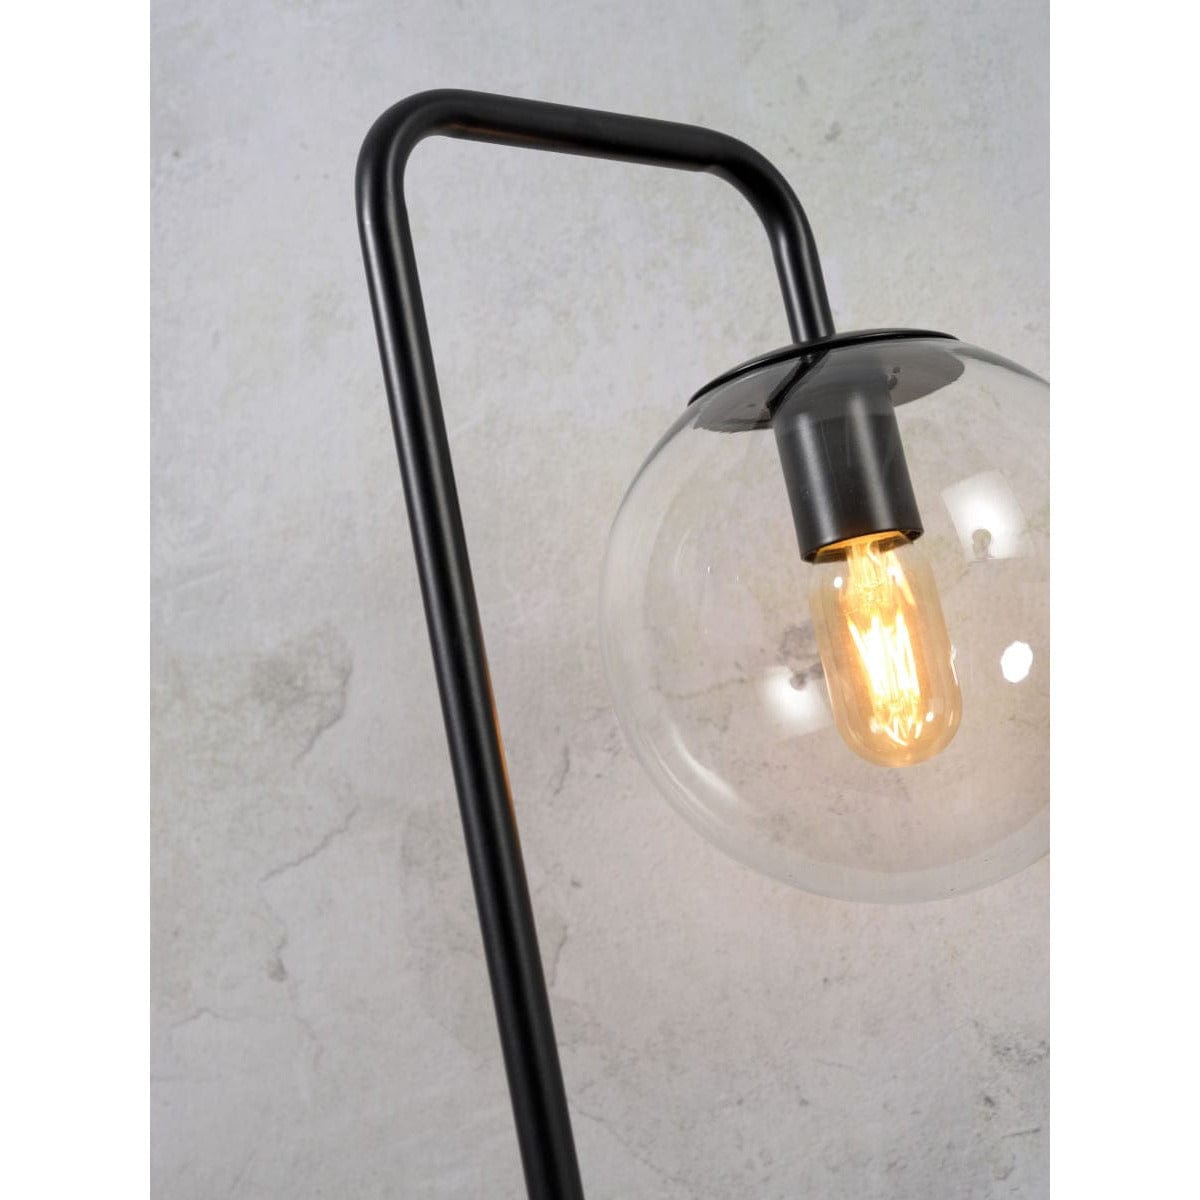 It's About RoMi Floor Lamp Warsaw Floor Lamp Black and Gold